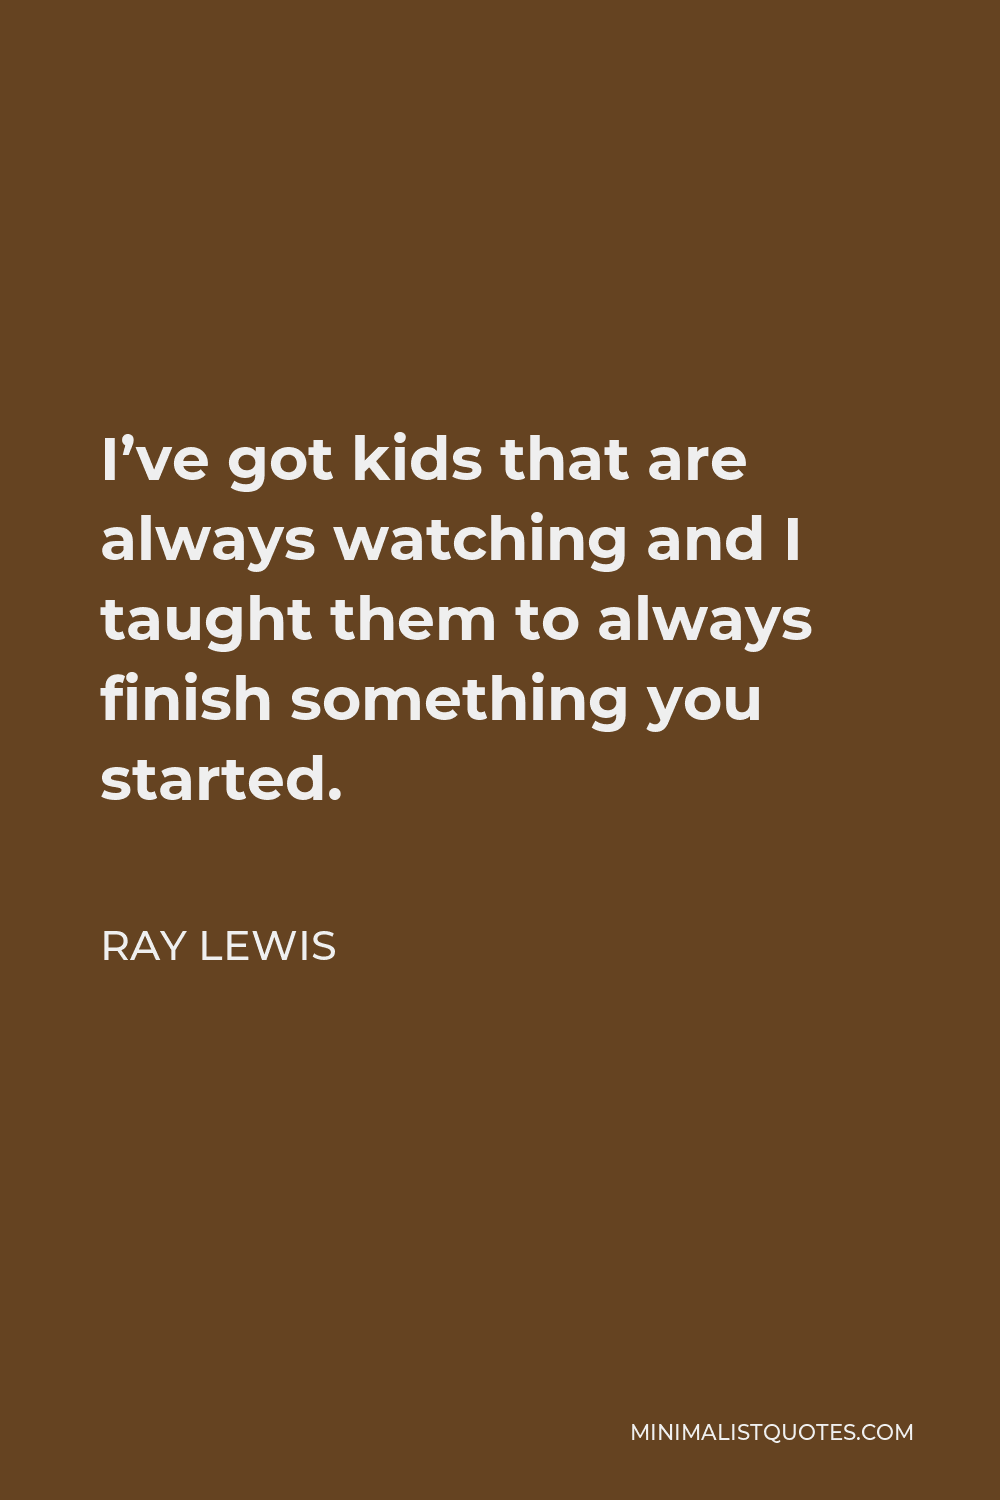 Ray Lewis Quote - I’ve got kids that are always watching and I taught them to always finish something you started.